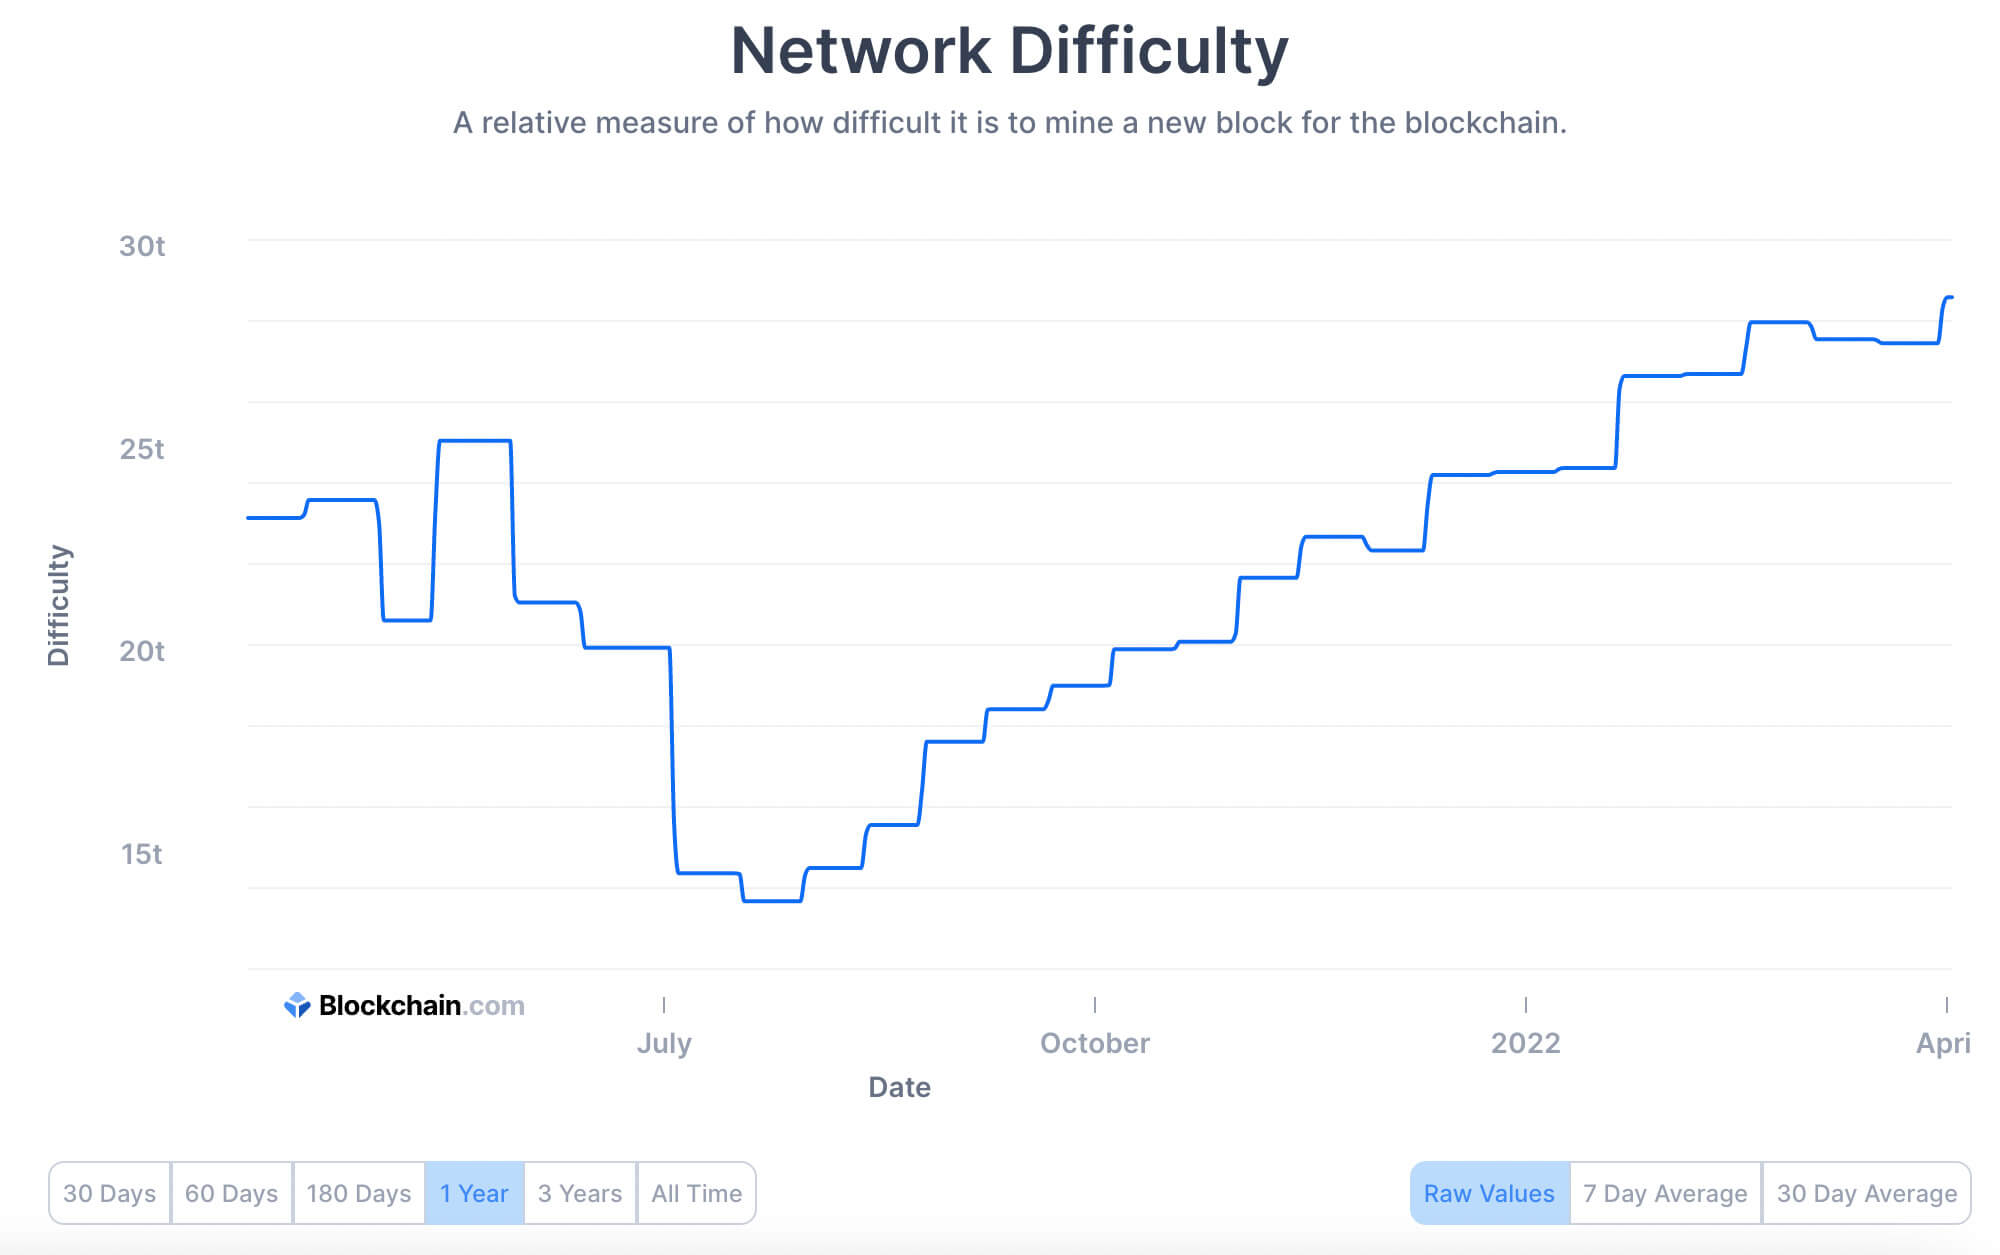 Bitcoin mining network difficulty reaches new all-time high